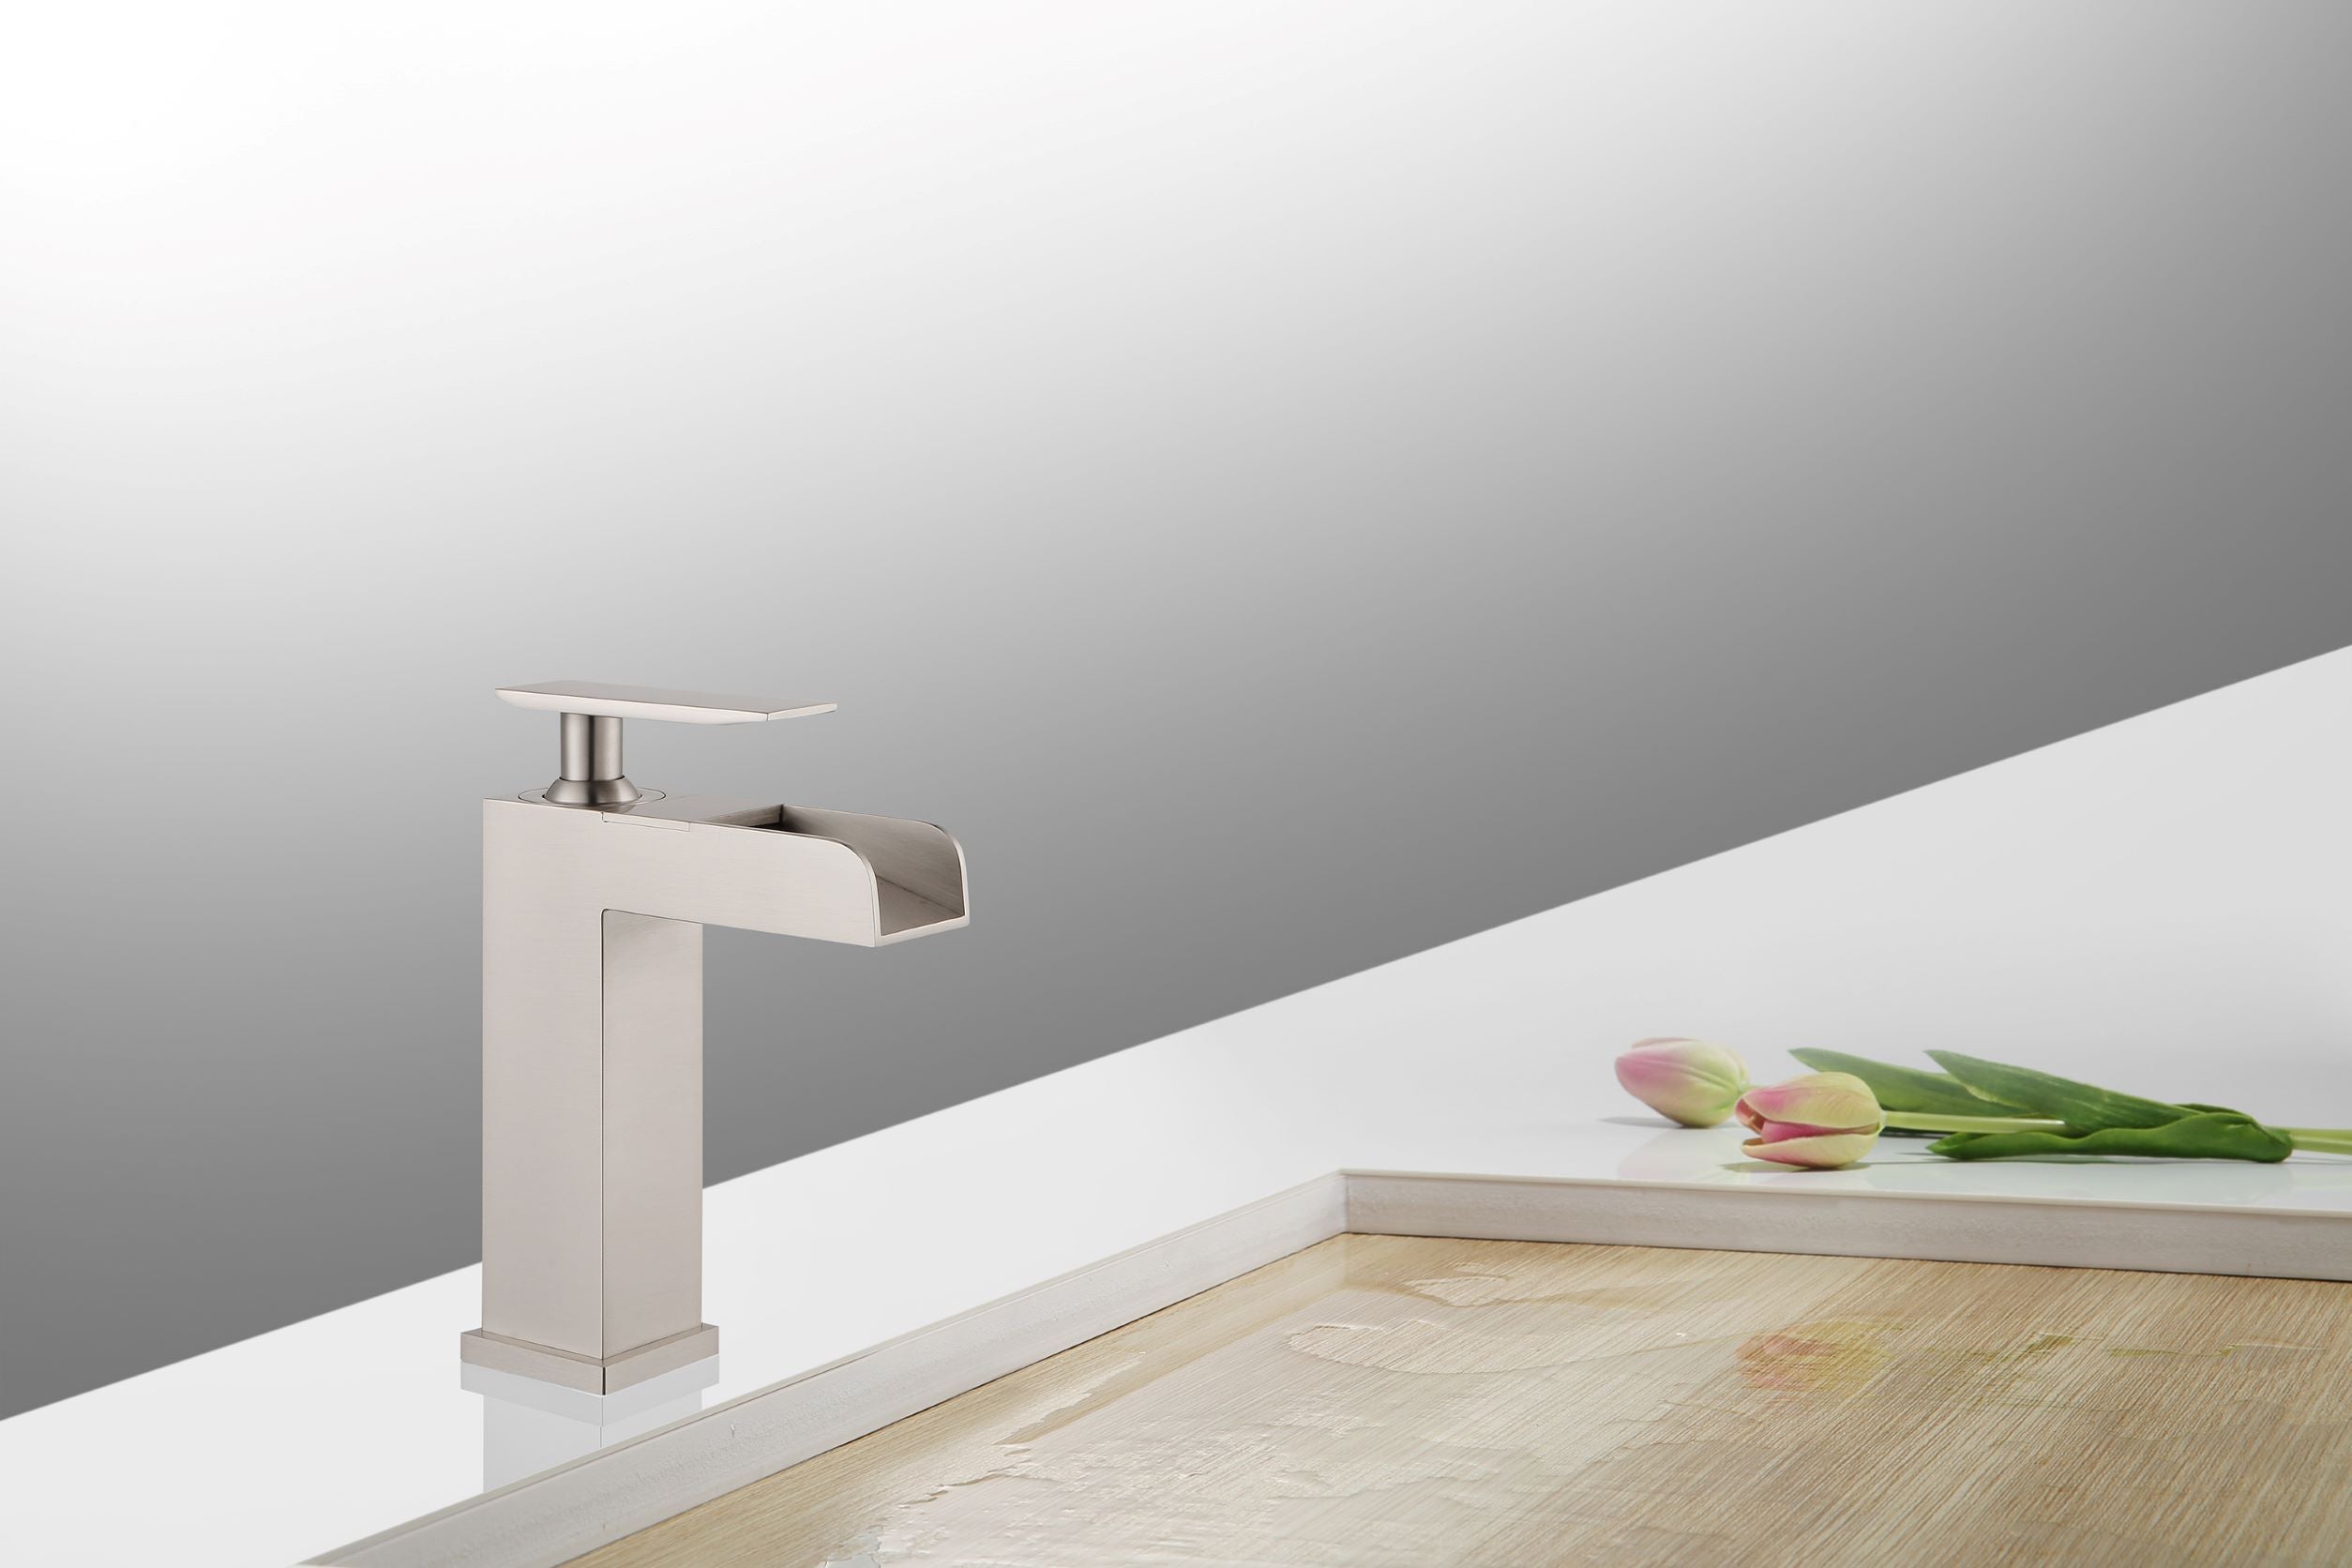 Faucet with Drain ZY8001 - East Shore Modern Home Furnishings